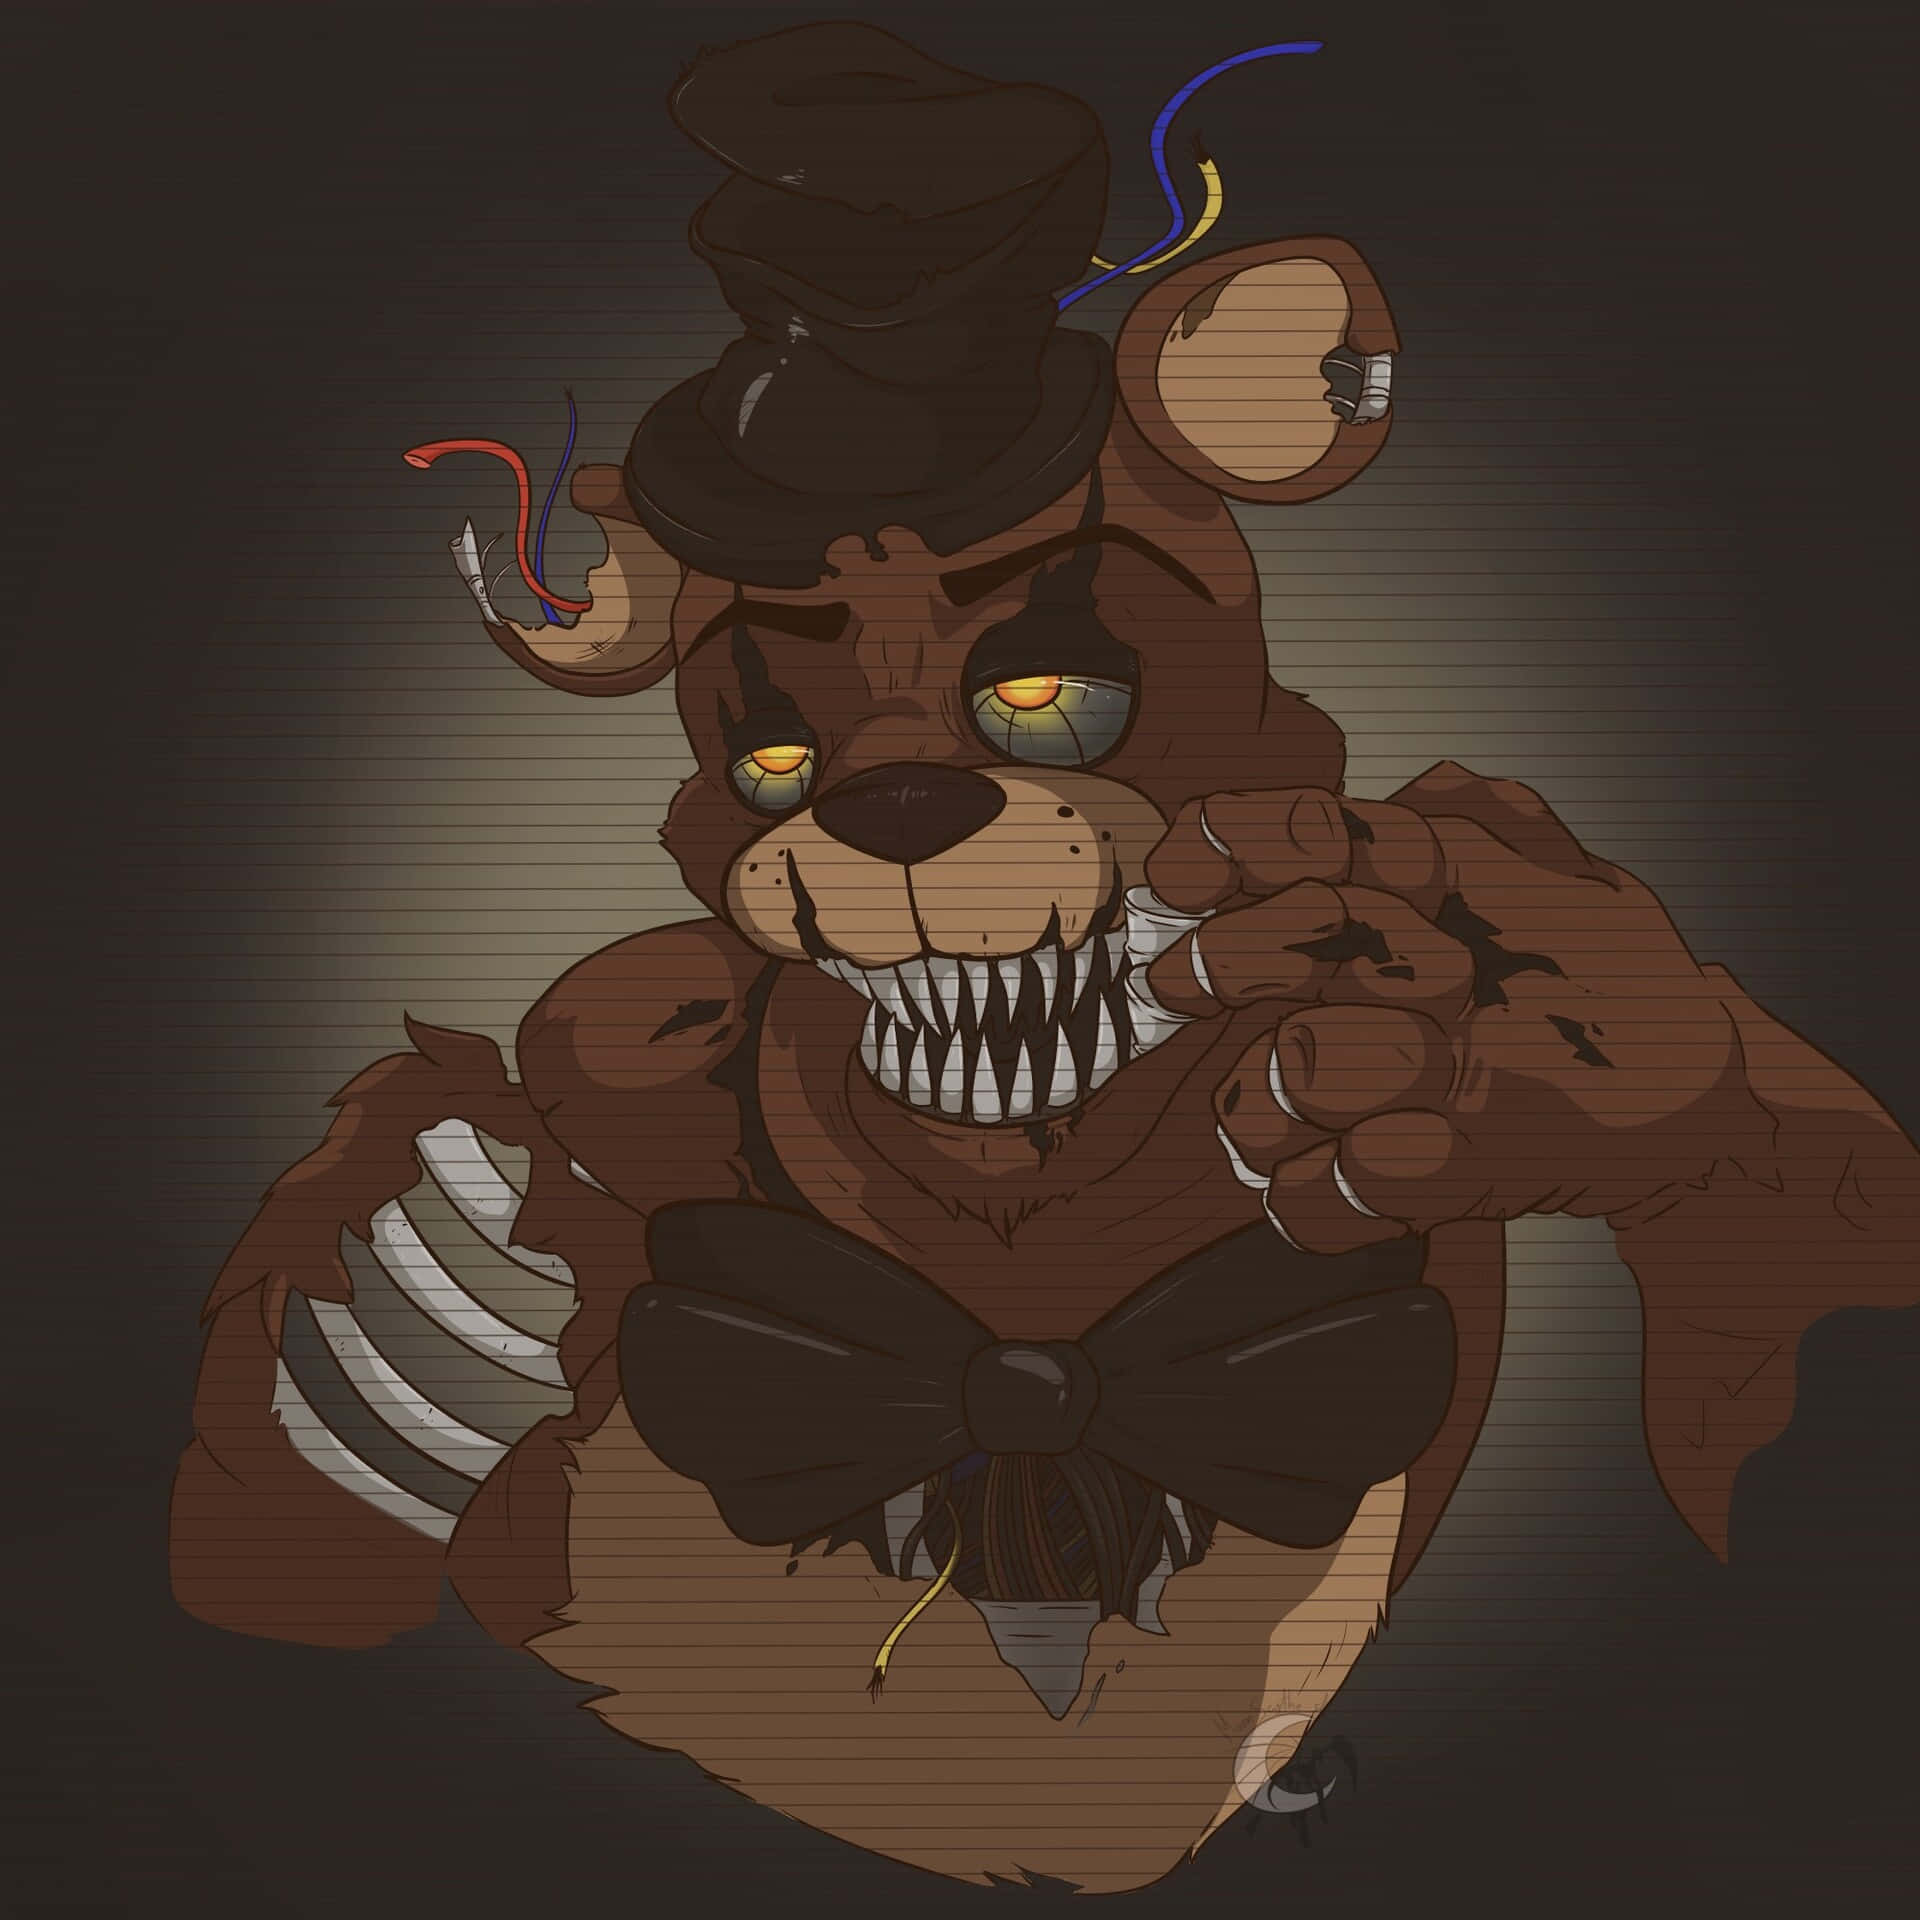 Five Nights At Freddy's By Sassy